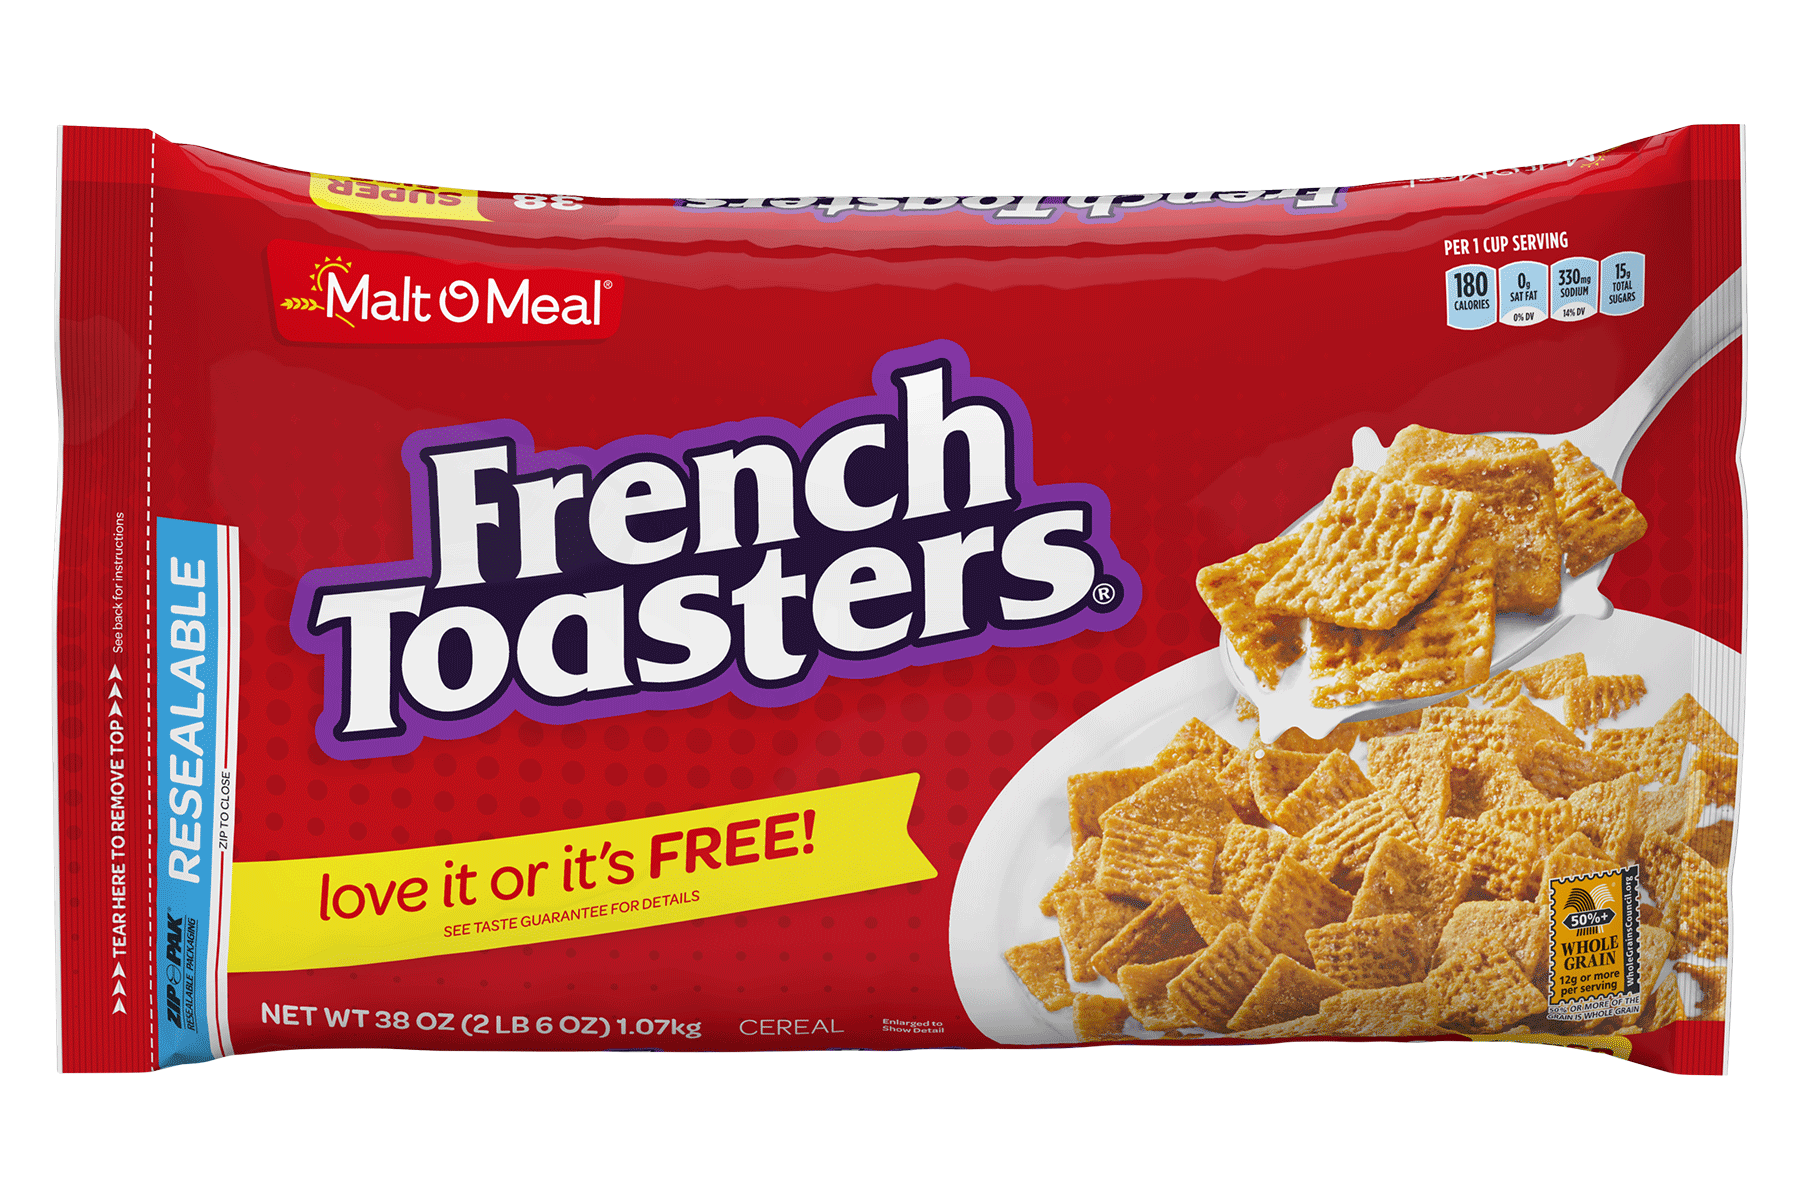 Malt-O-Meal French Toasters cereal